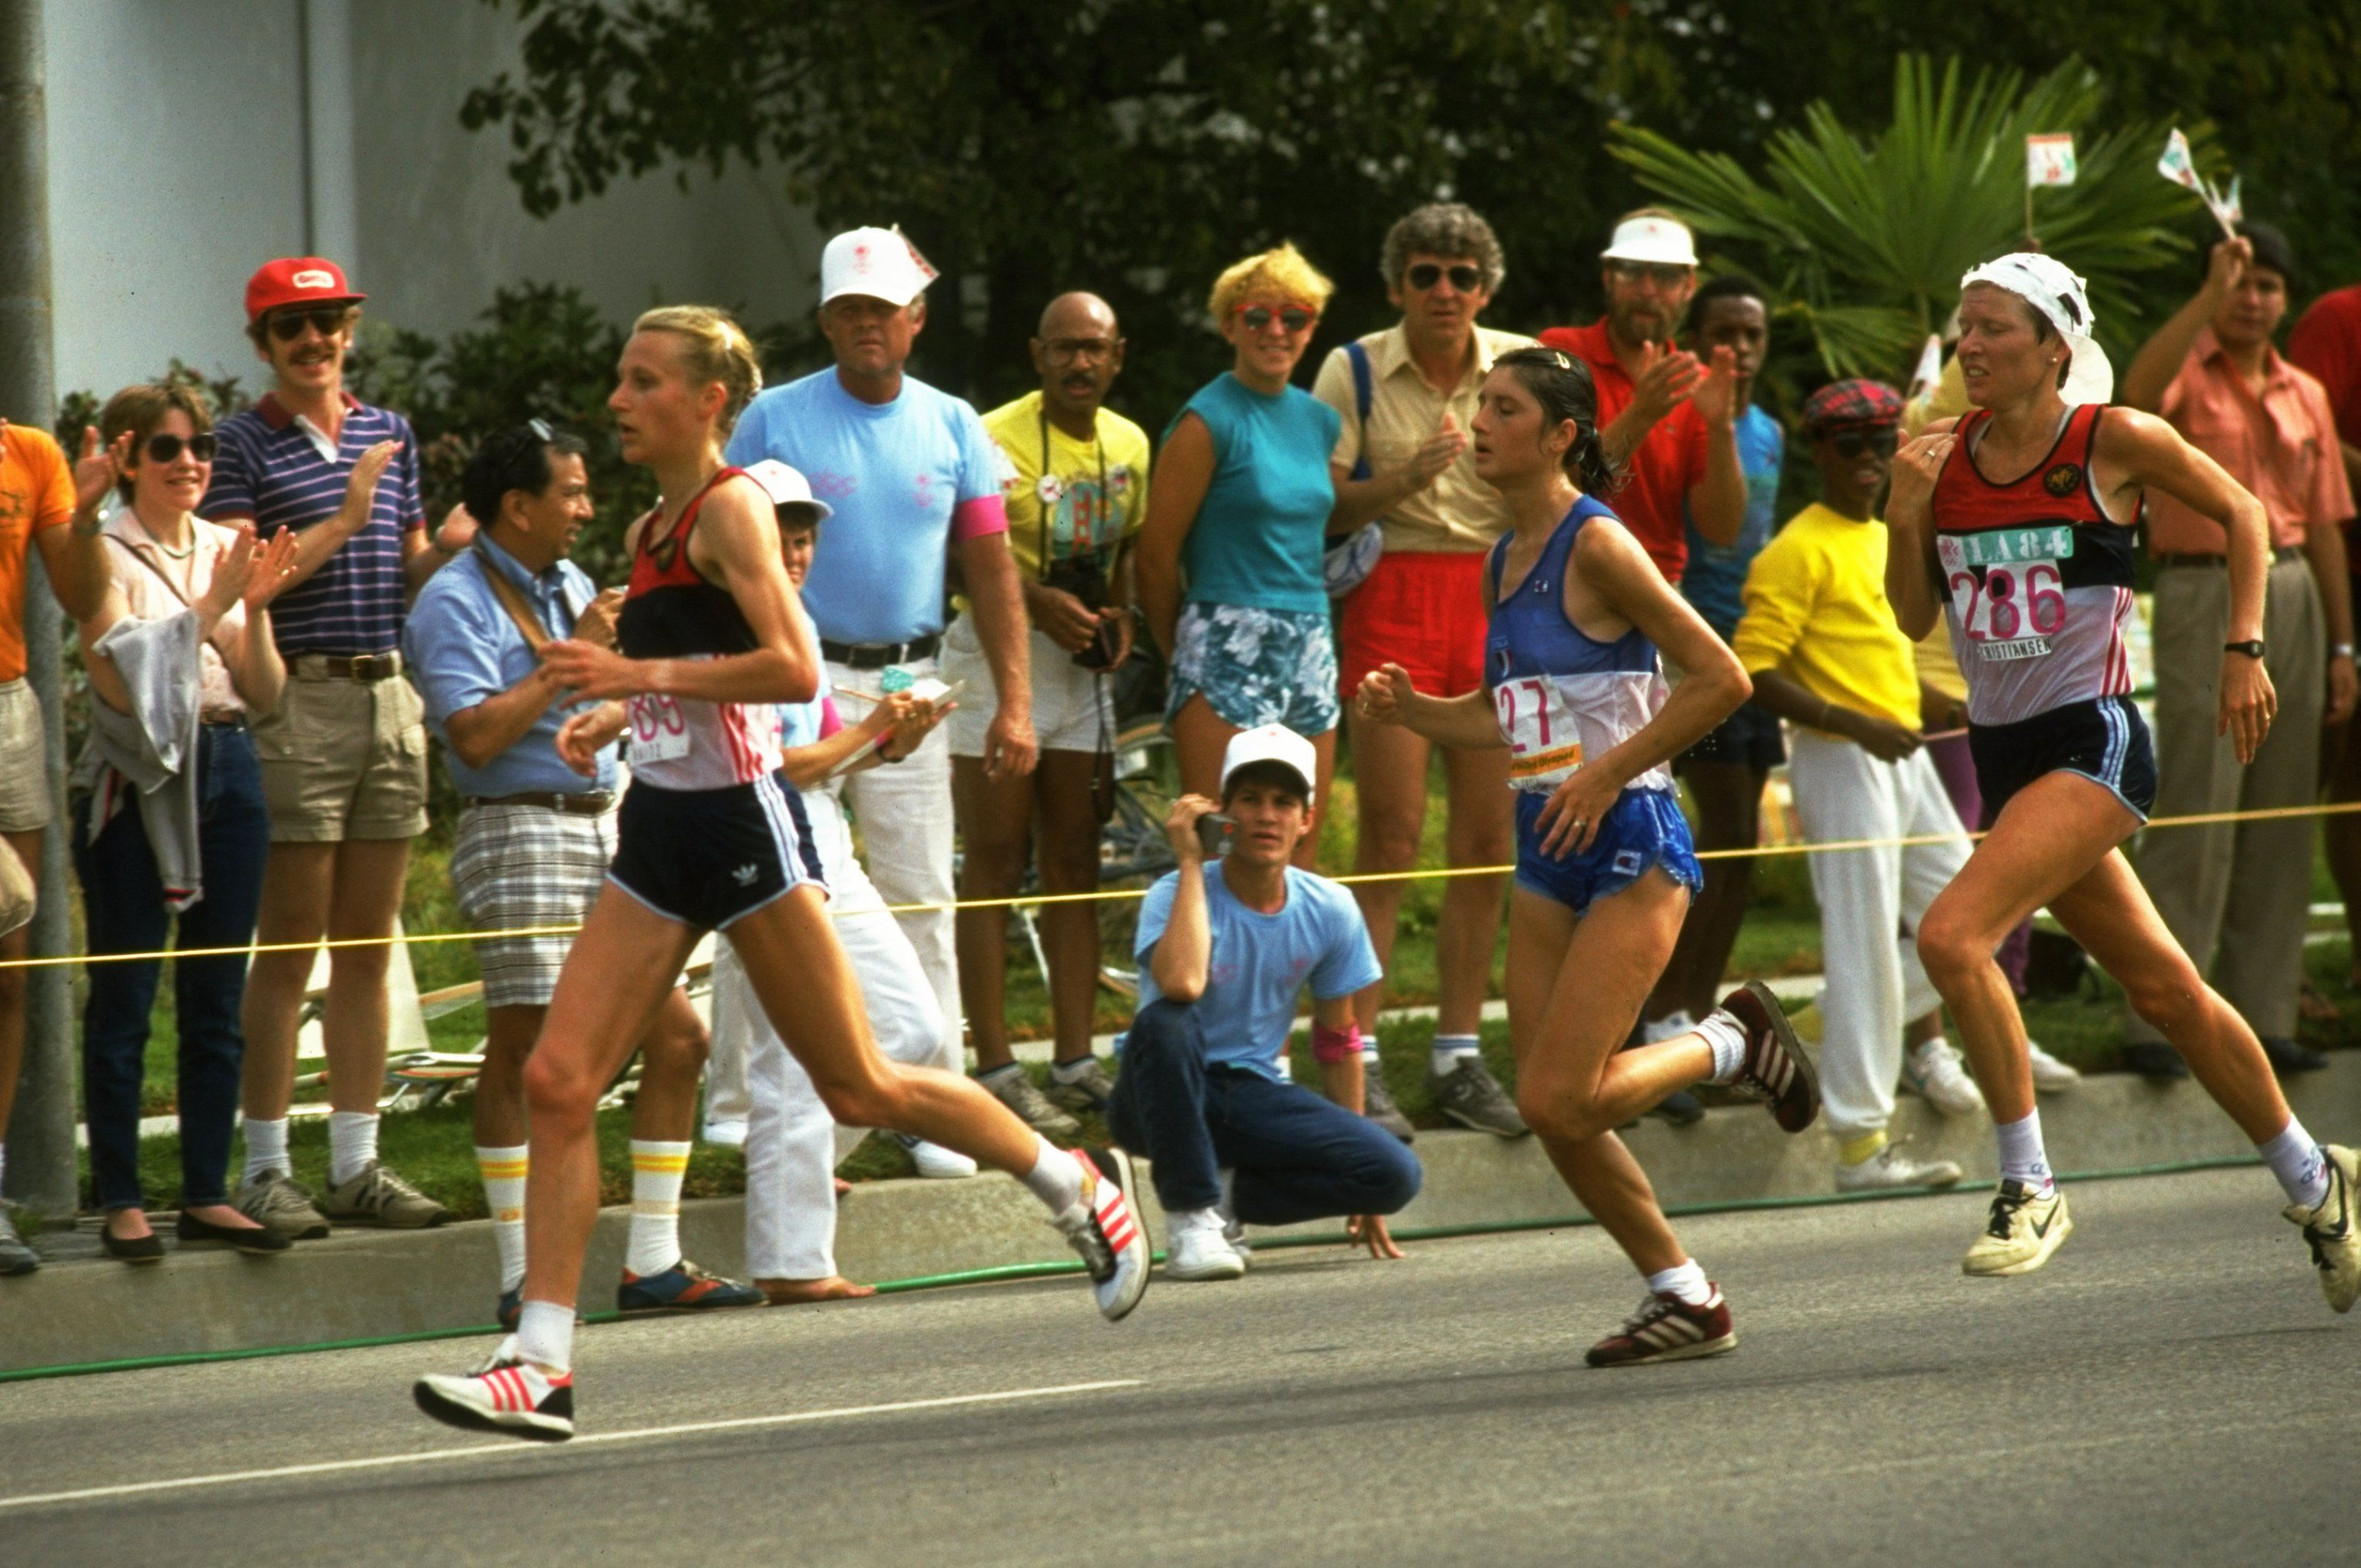 Grete Waitz leads from Laura Fogli and Ingrid Kristiansen during the 1984 Olympic marathon in Los Angeles